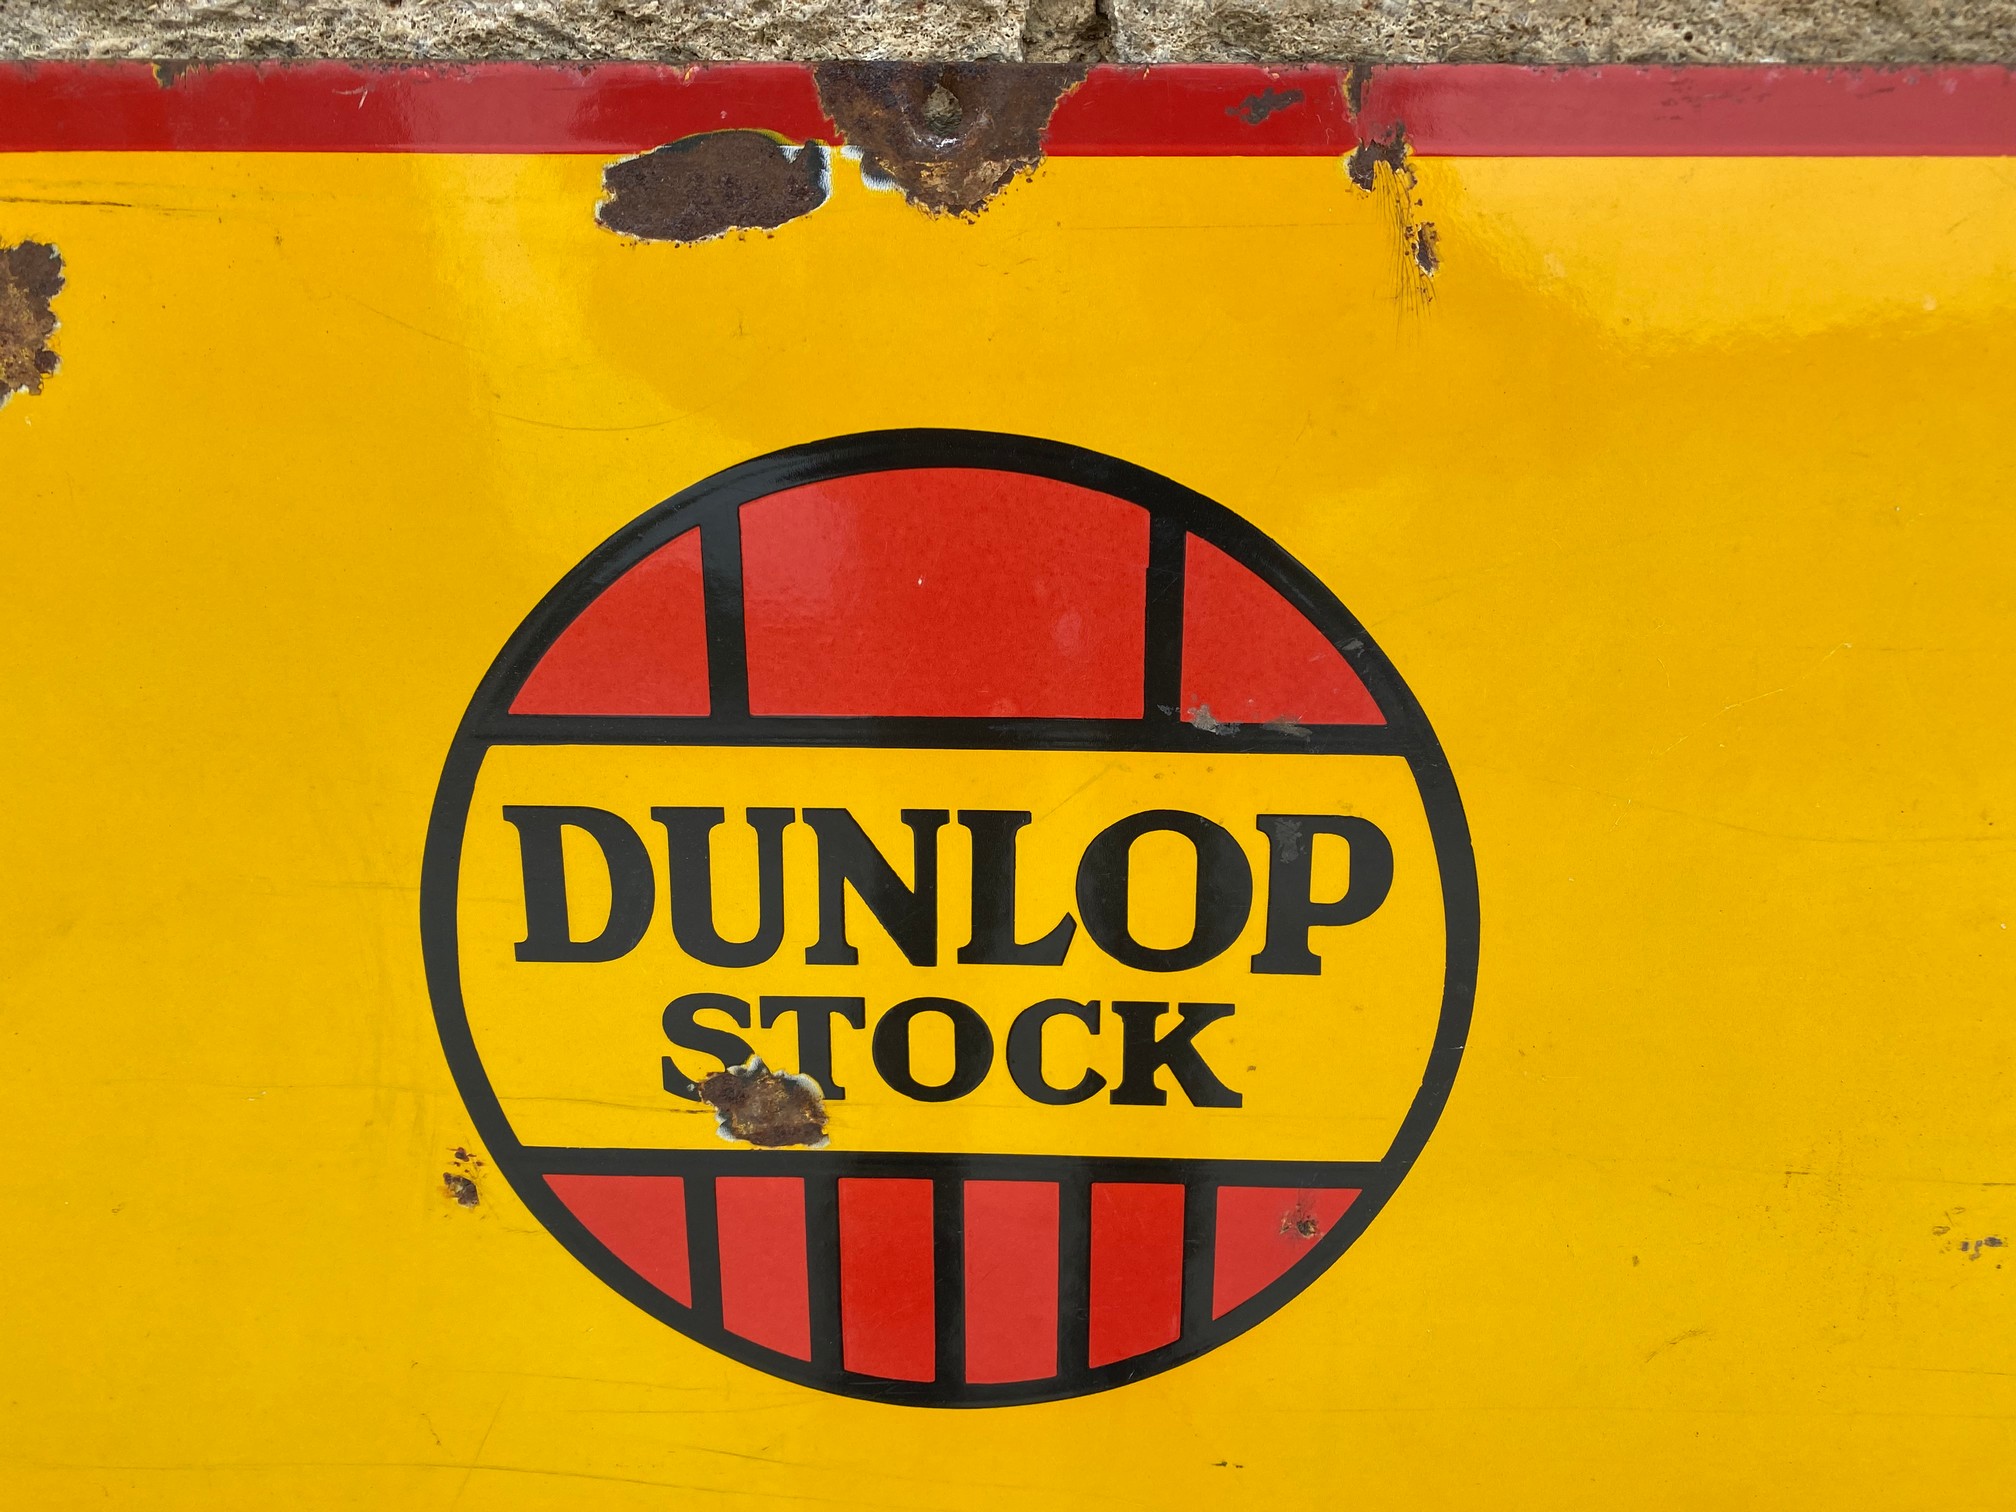 A Dunlop 'The first tyre in the world' rectangular enamel sign by Jordan of Bilston, 48 x 36". - Image 4 of 5